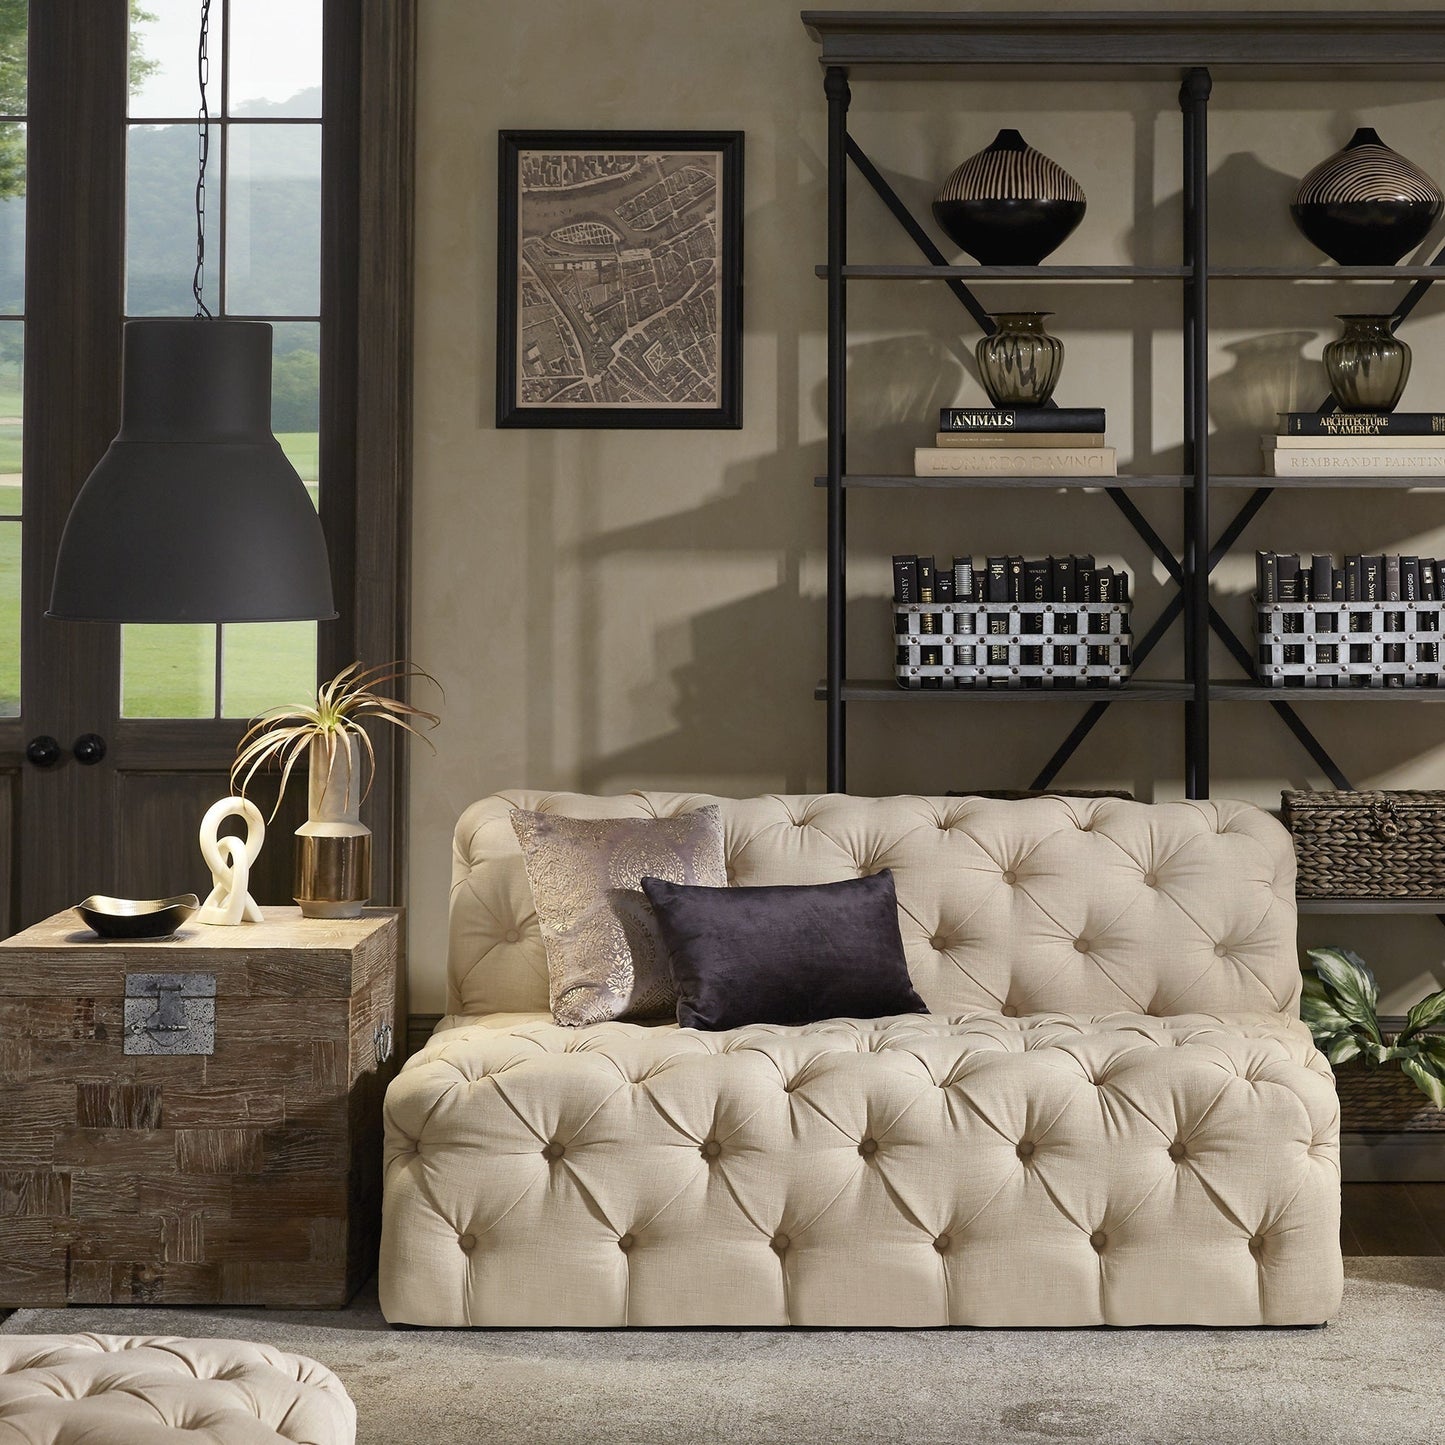 Beige Linen Tufted Chesterfield Modular Sectional - 7-Seat, U-Shaped, Right Arm Chaise Sectional